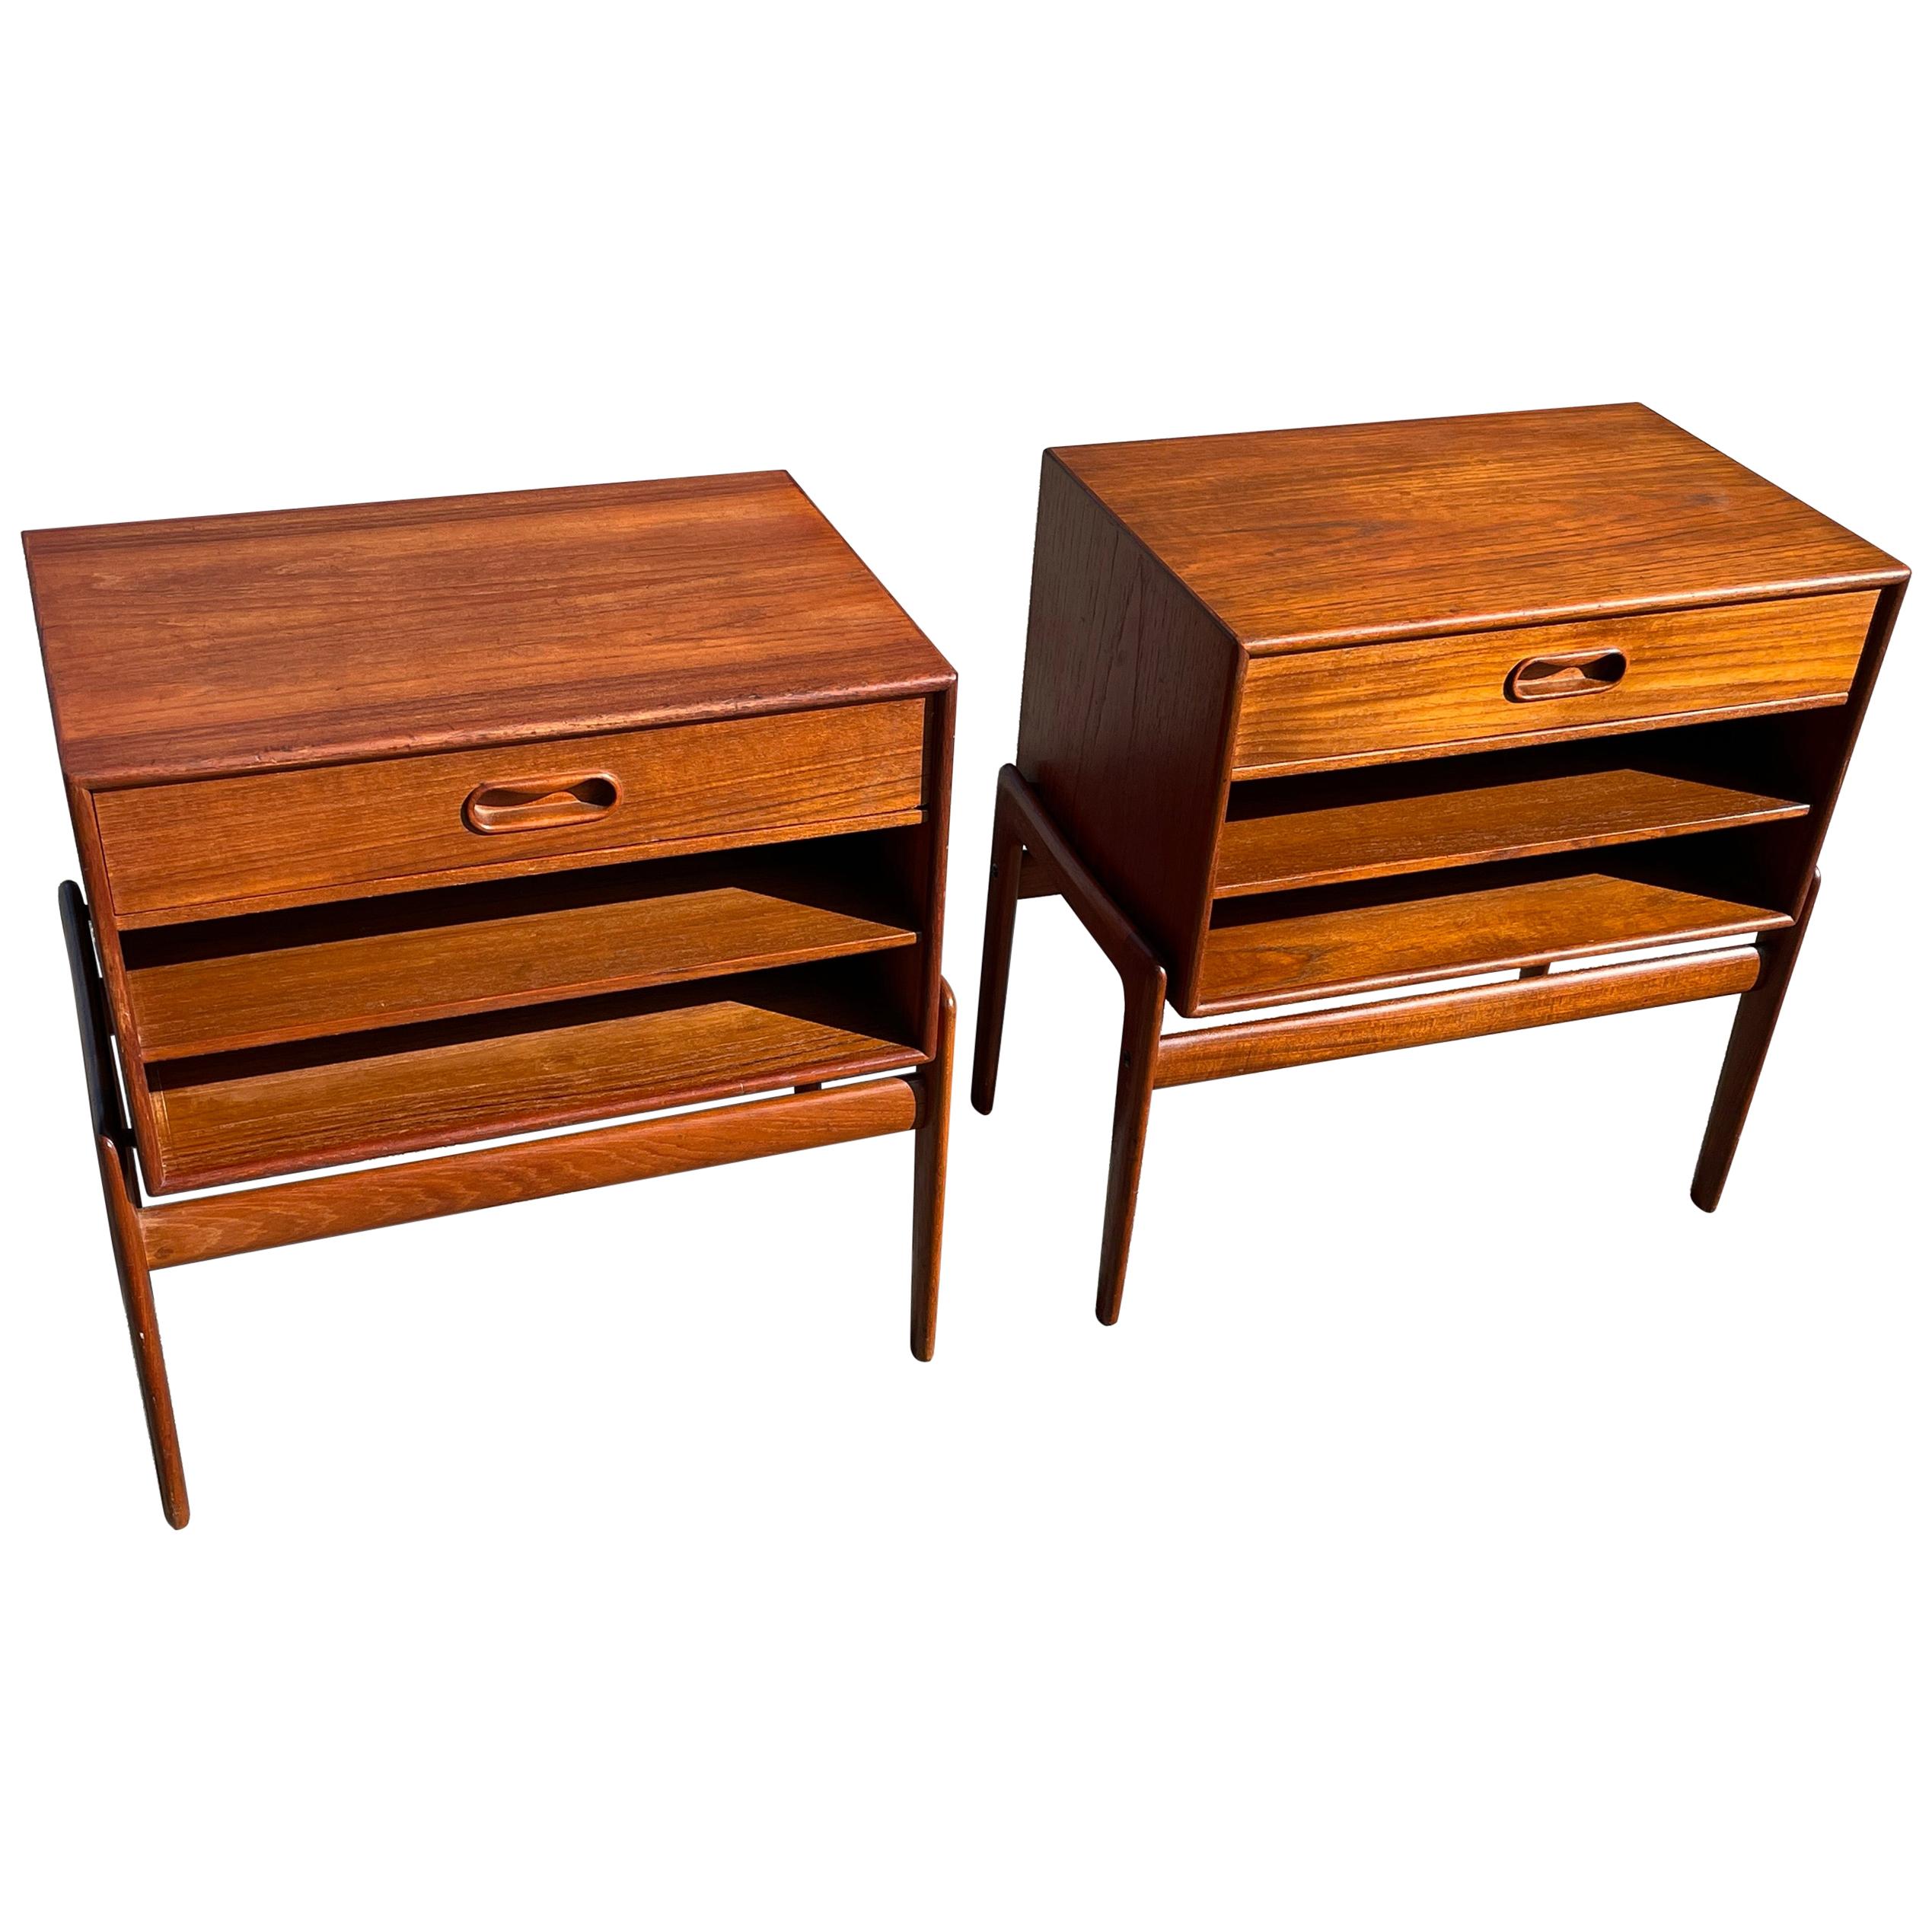 Arne Vodder Nightstands from the 1960s